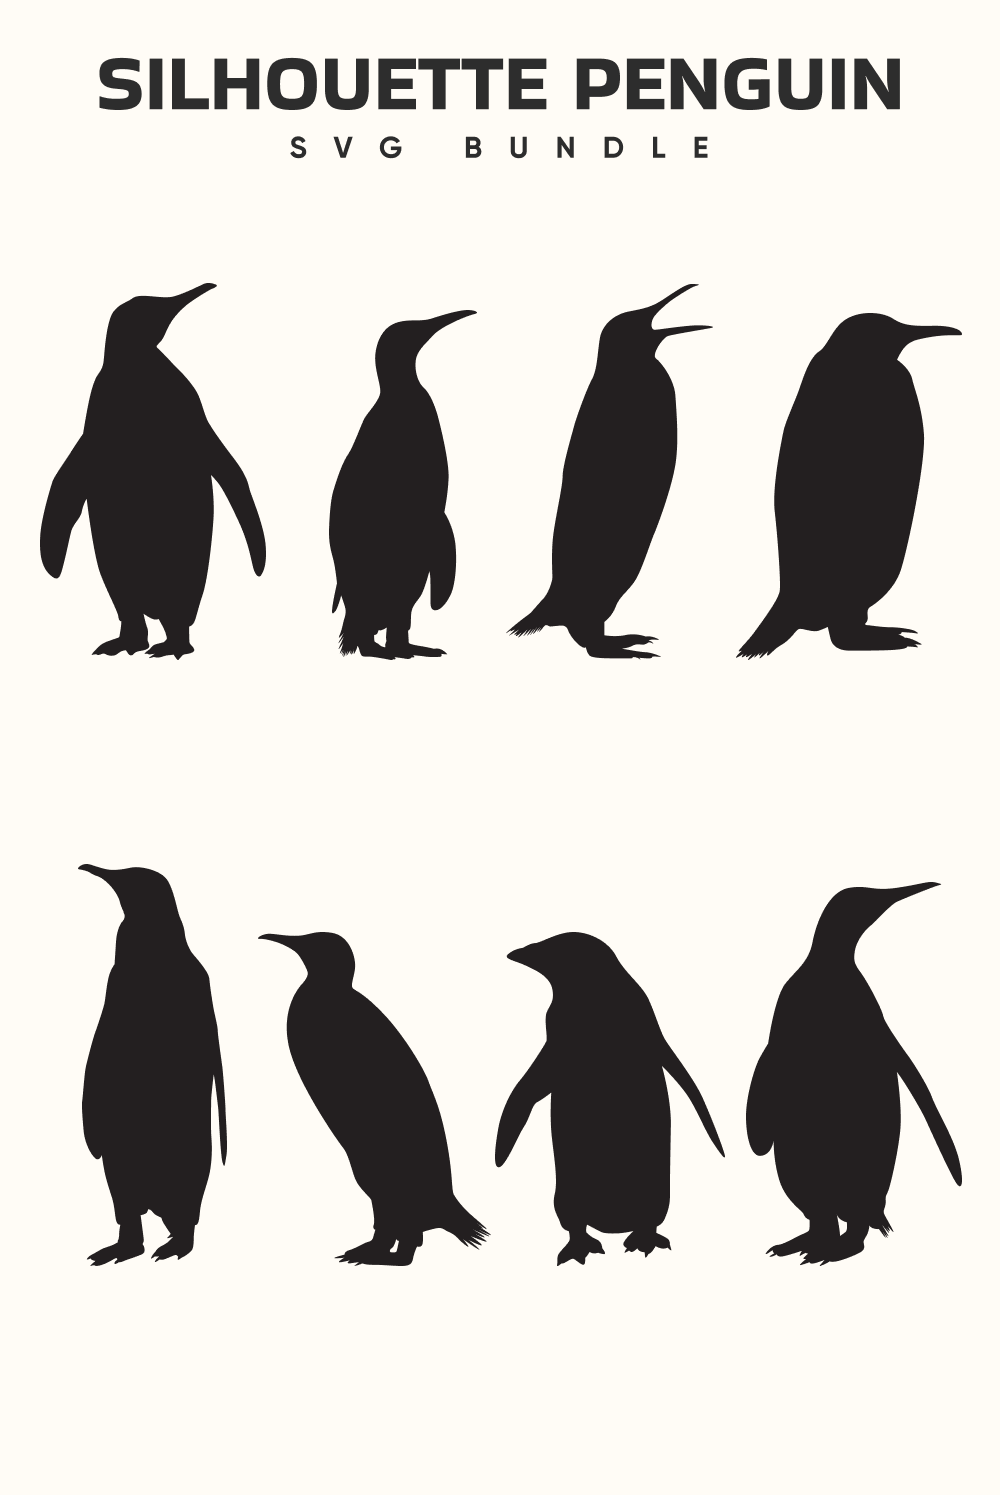 Silhouettes of penguins in different positions and sizes.